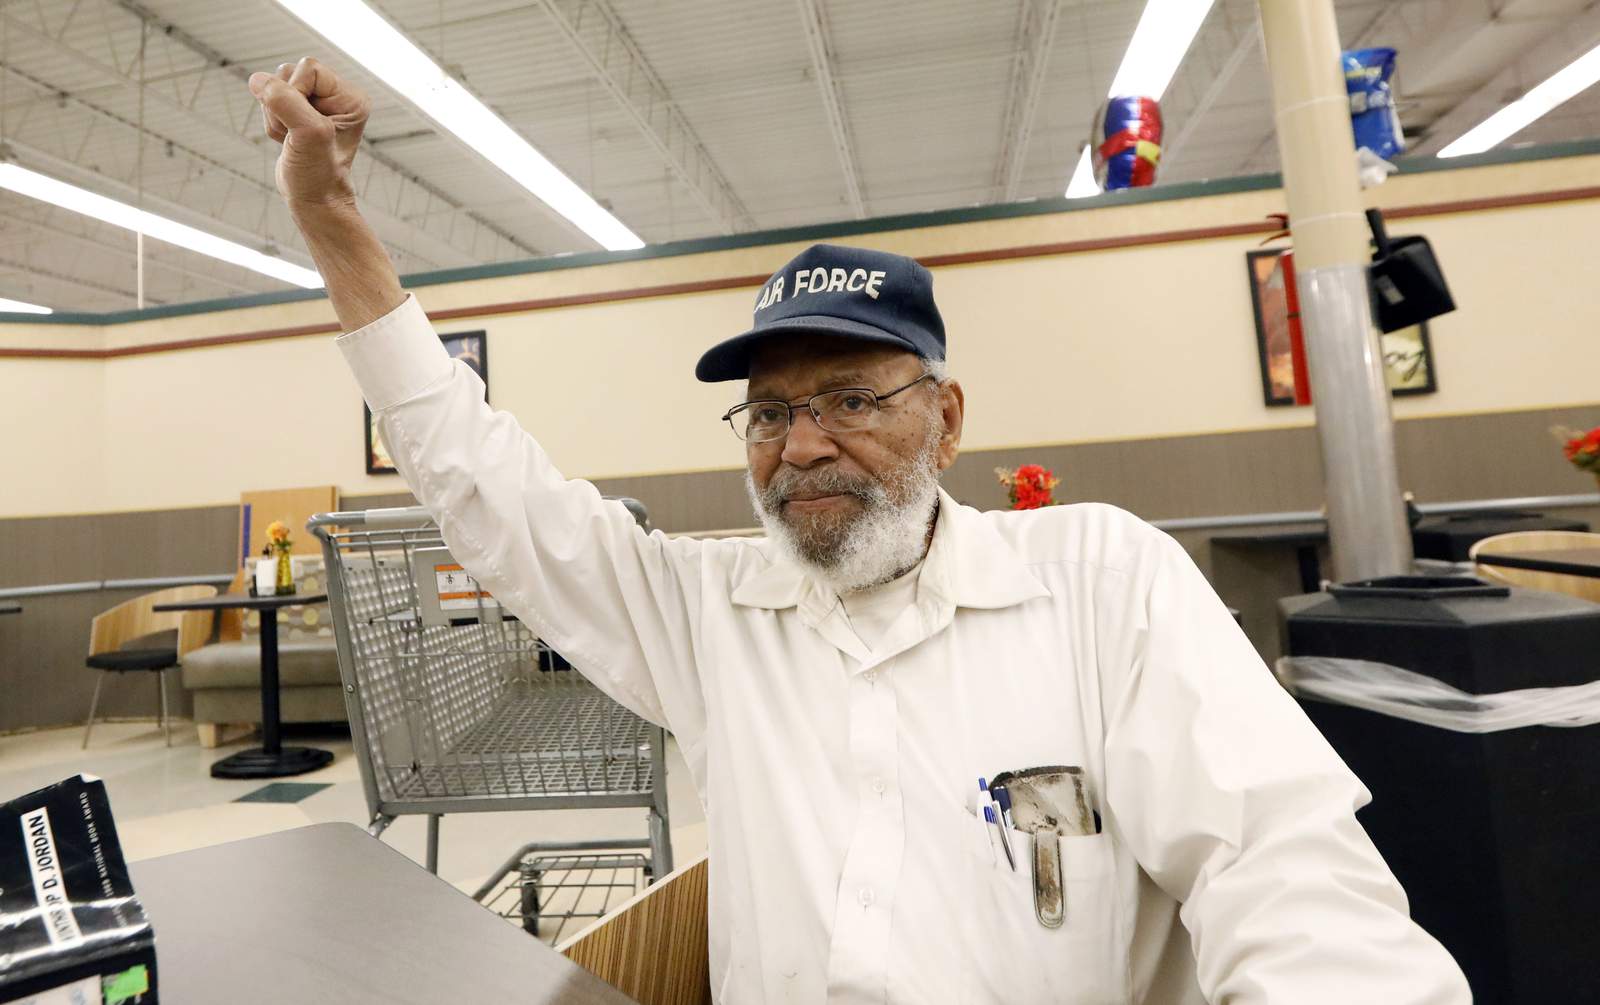 James Meredith film weighs 'complicated' civil rights figure